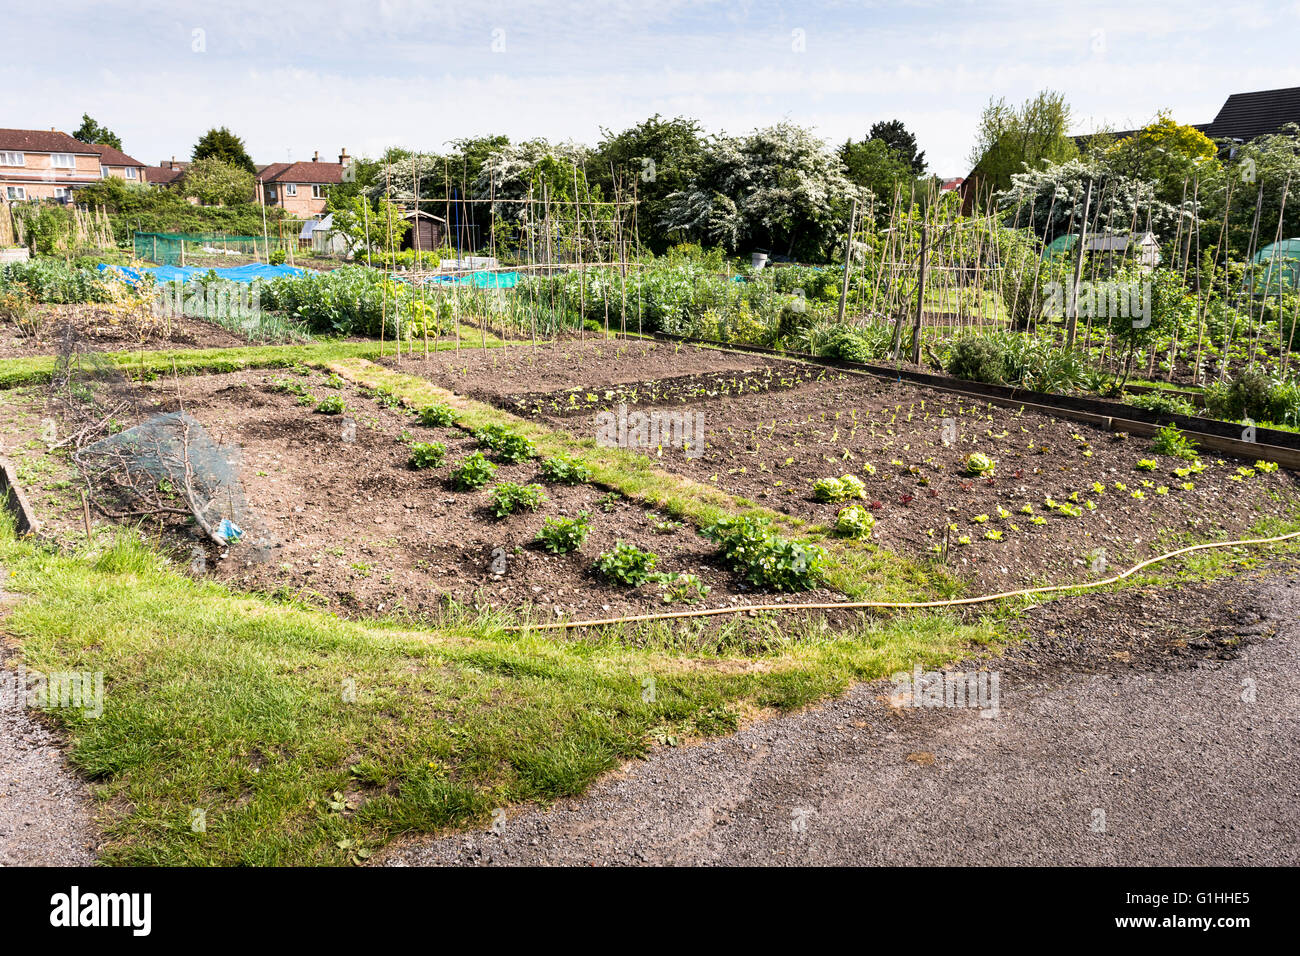 Well tended allotment garden in springtime. A plot of land for families to grow vegetables for personal use. Stock Photo